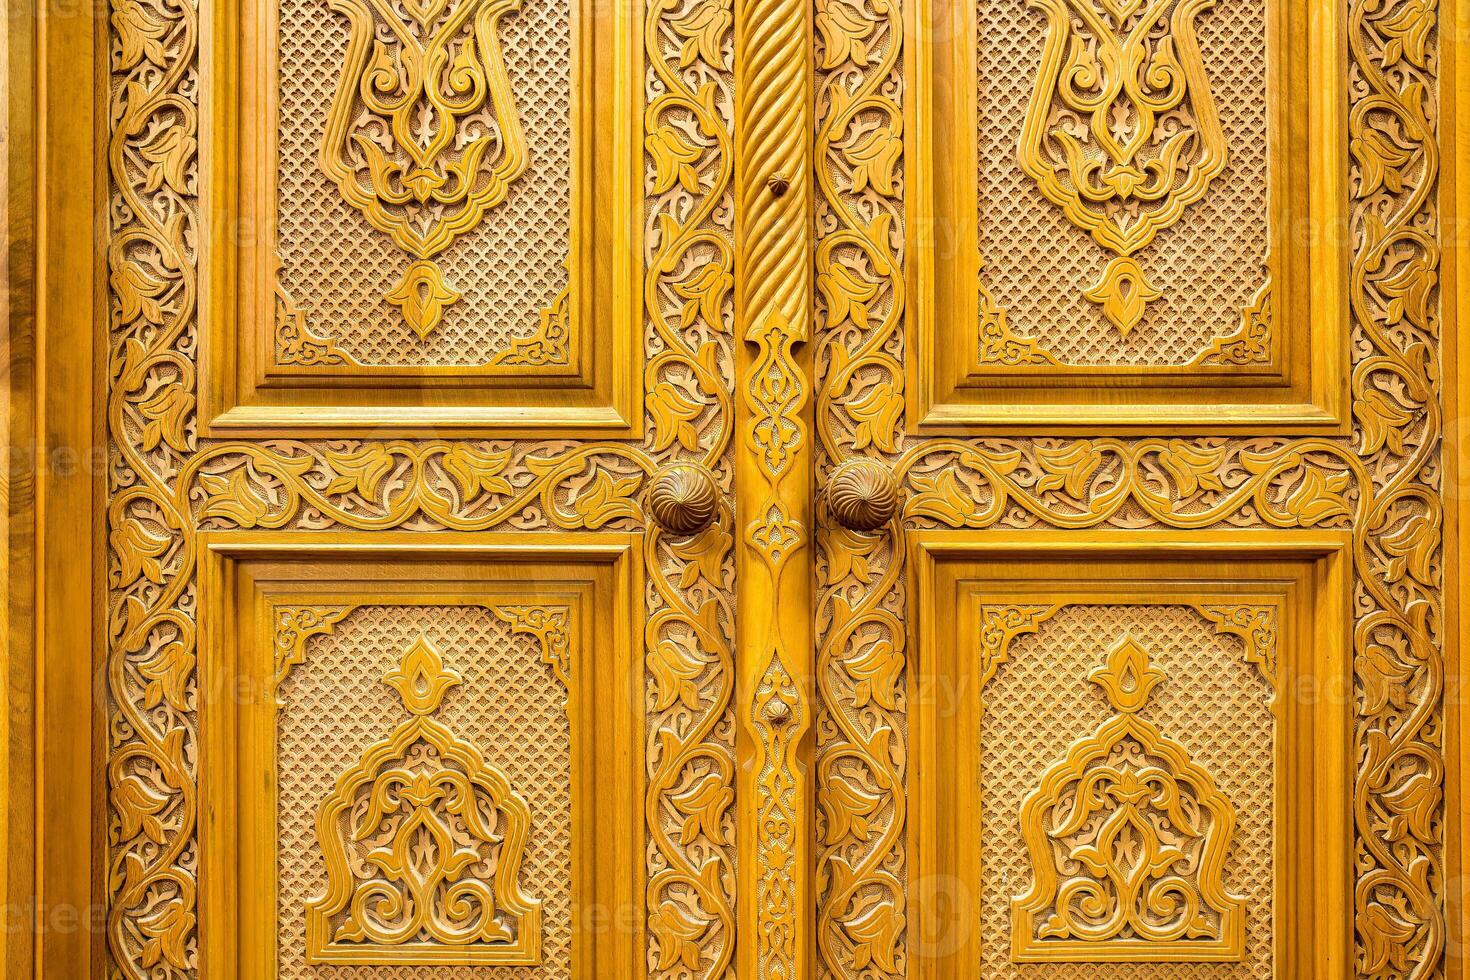 Carved wooden doors with patterns and mosaics. Abstract background. photo